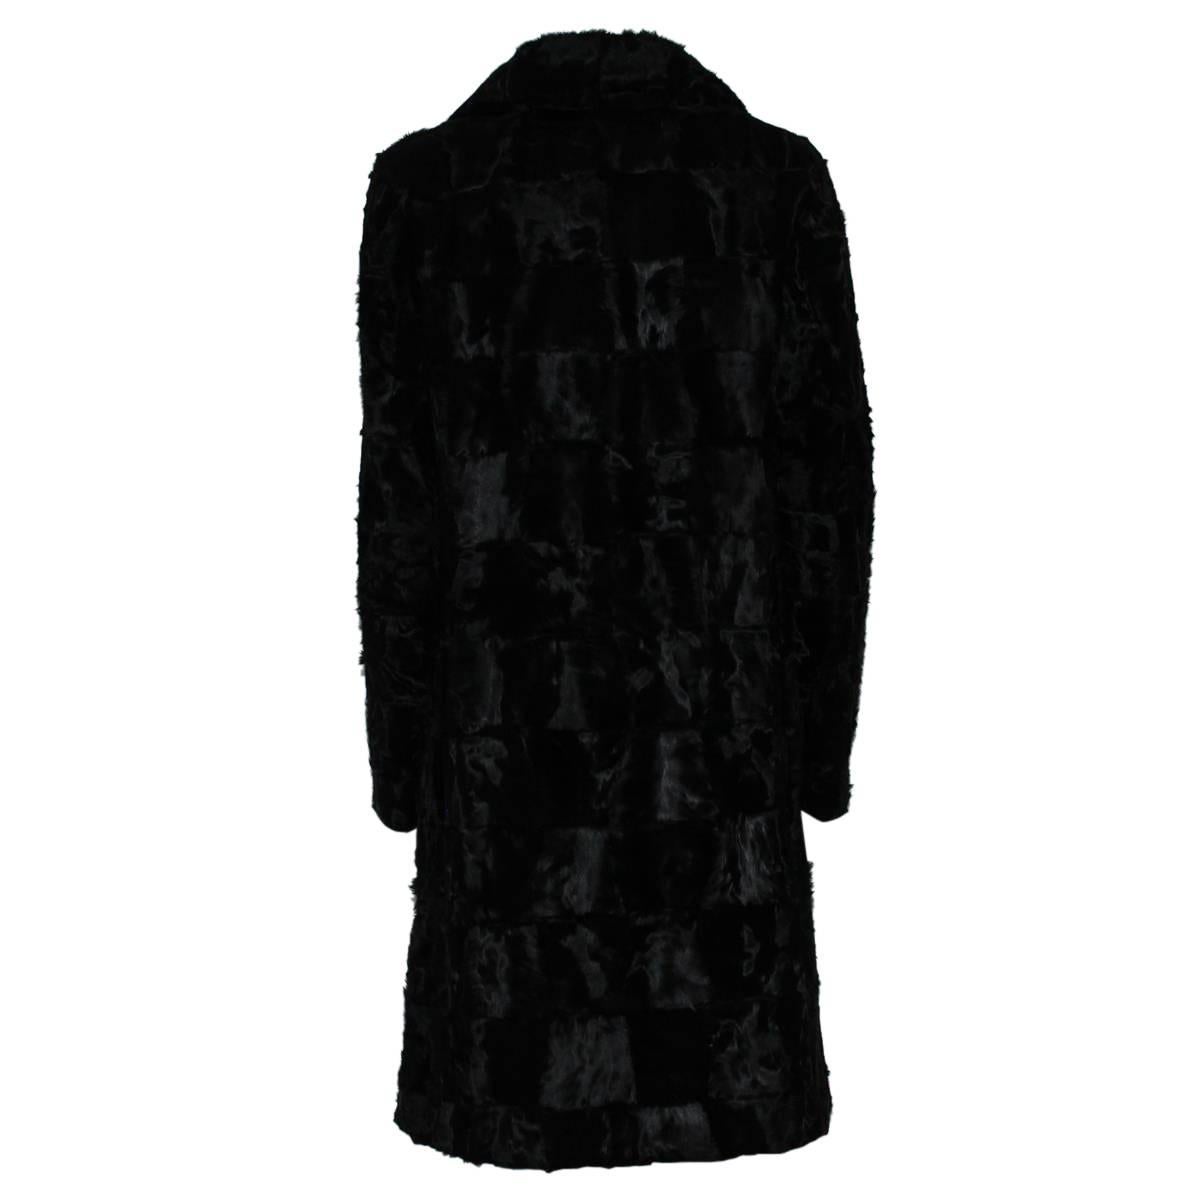 Amazing fur coat by Simonetta Ravizza
Astrakhan lamb fur
Black color
2 Buttons
2 Pockets
Total length from shoulder cm 94 (37 inches)
Made in Italy
Worldwide express shipping included in the price !